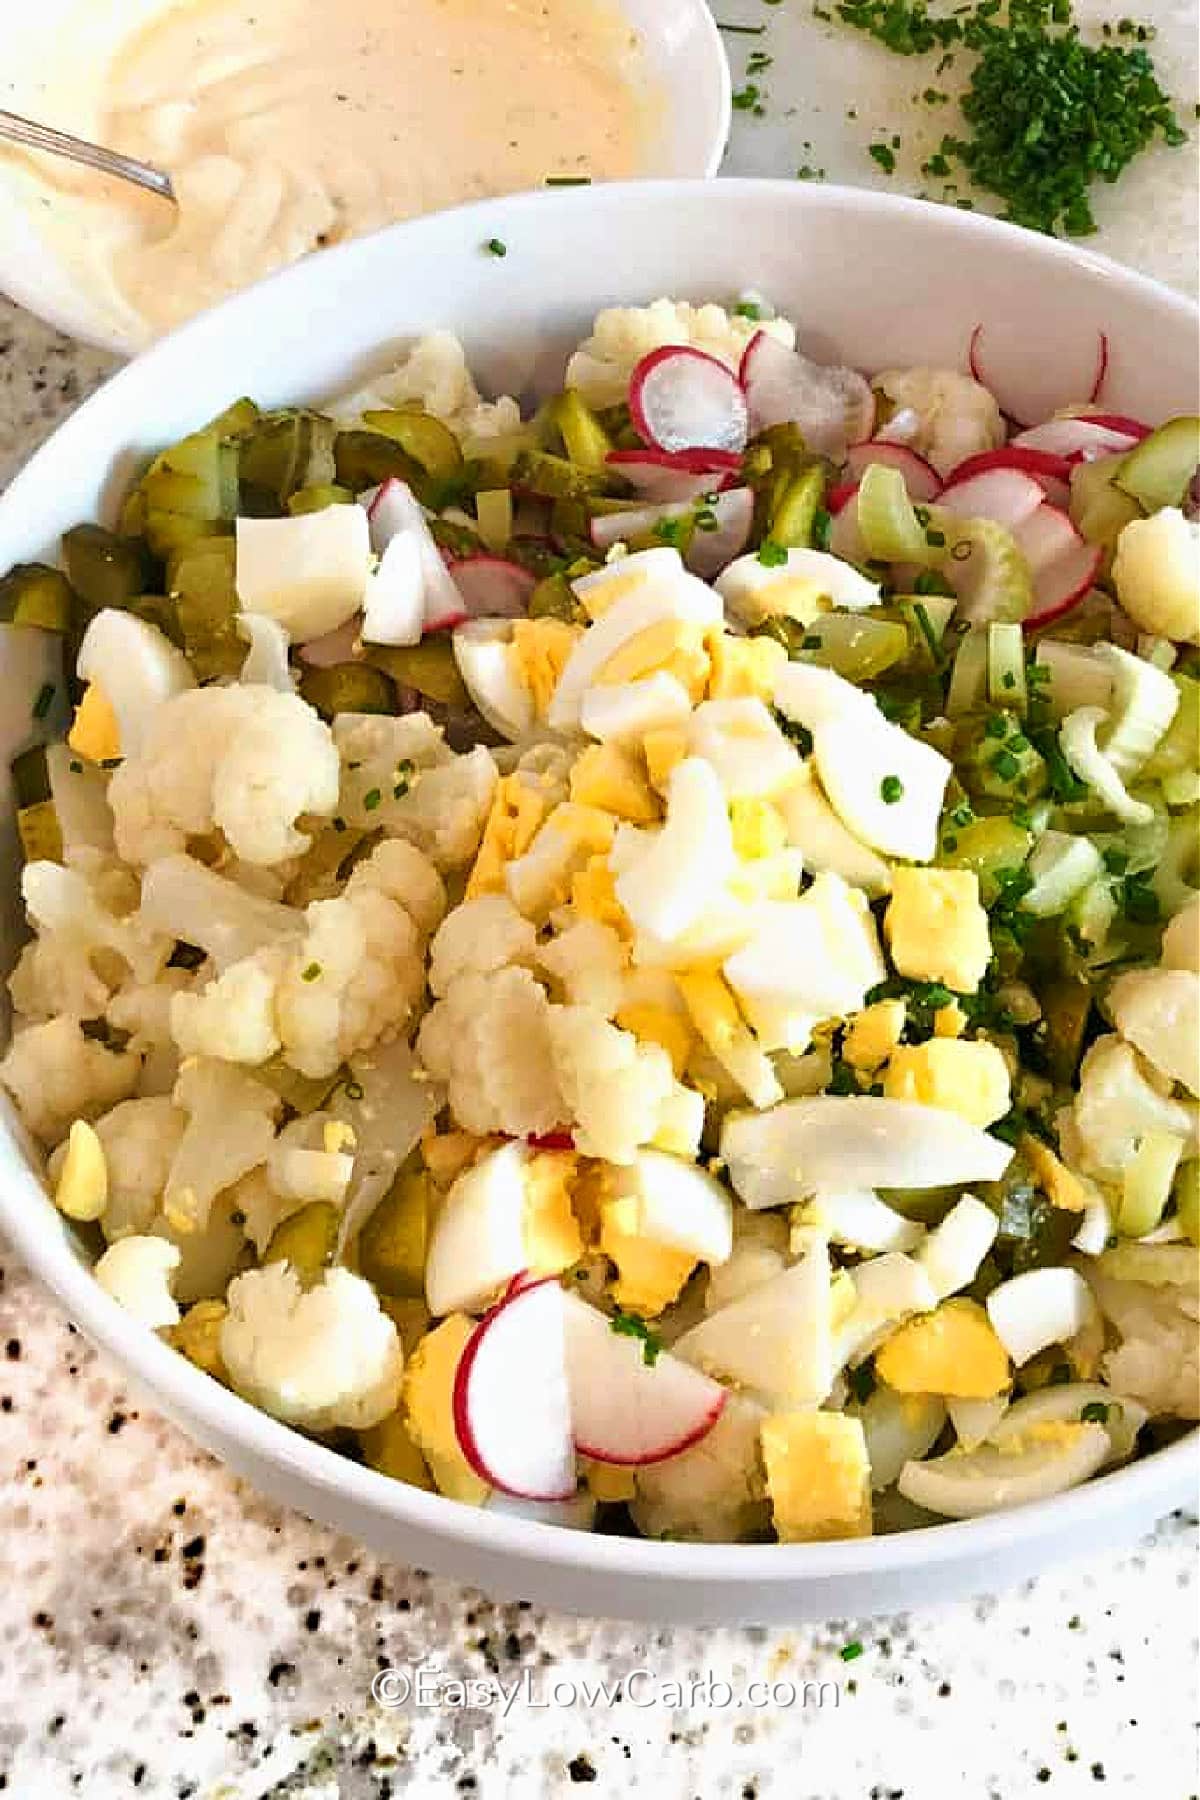 Cauliflower potato salad in a white bowl before the dressing has been added